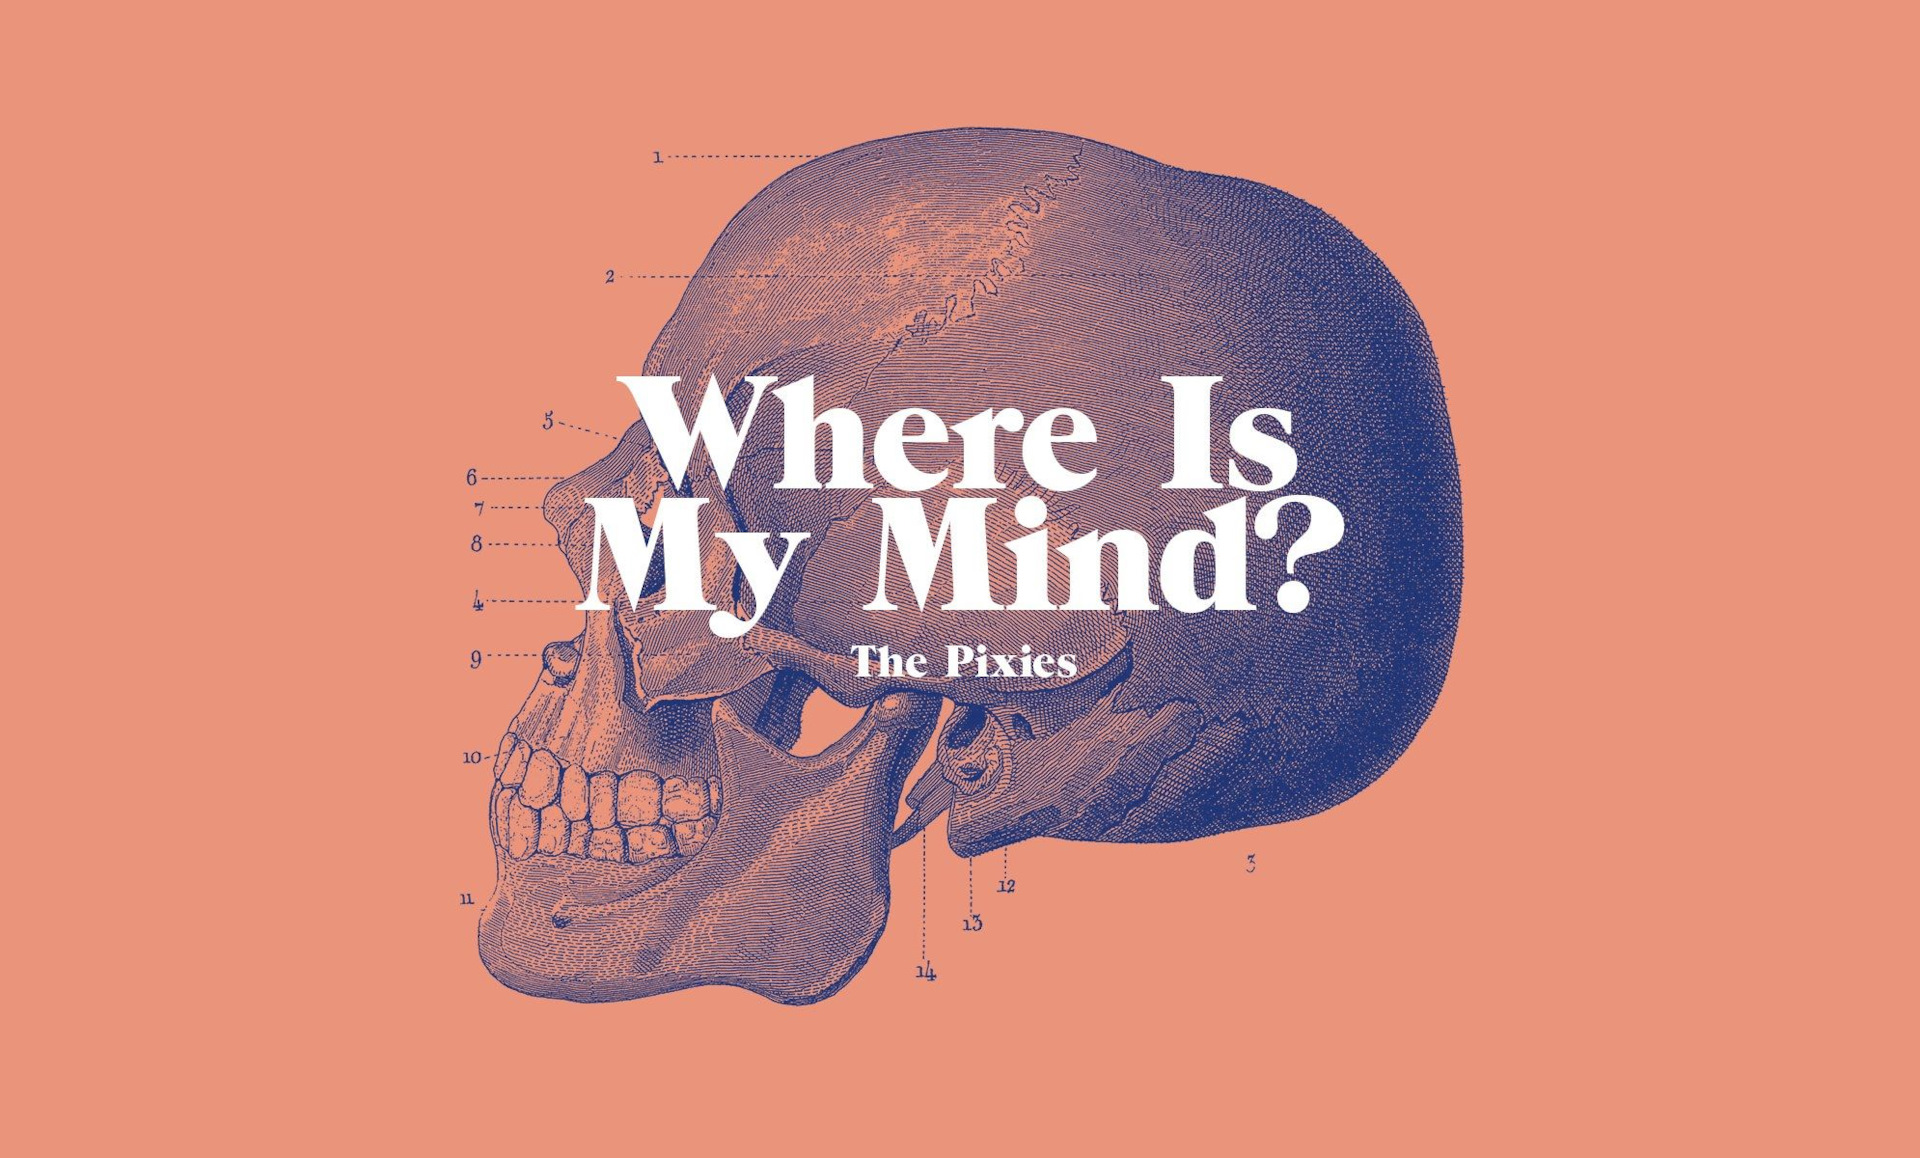 Where is my head. Where is my Mind. Pixies where is my Mind. Where is my Mind обложка. Where is my Mind альбом.